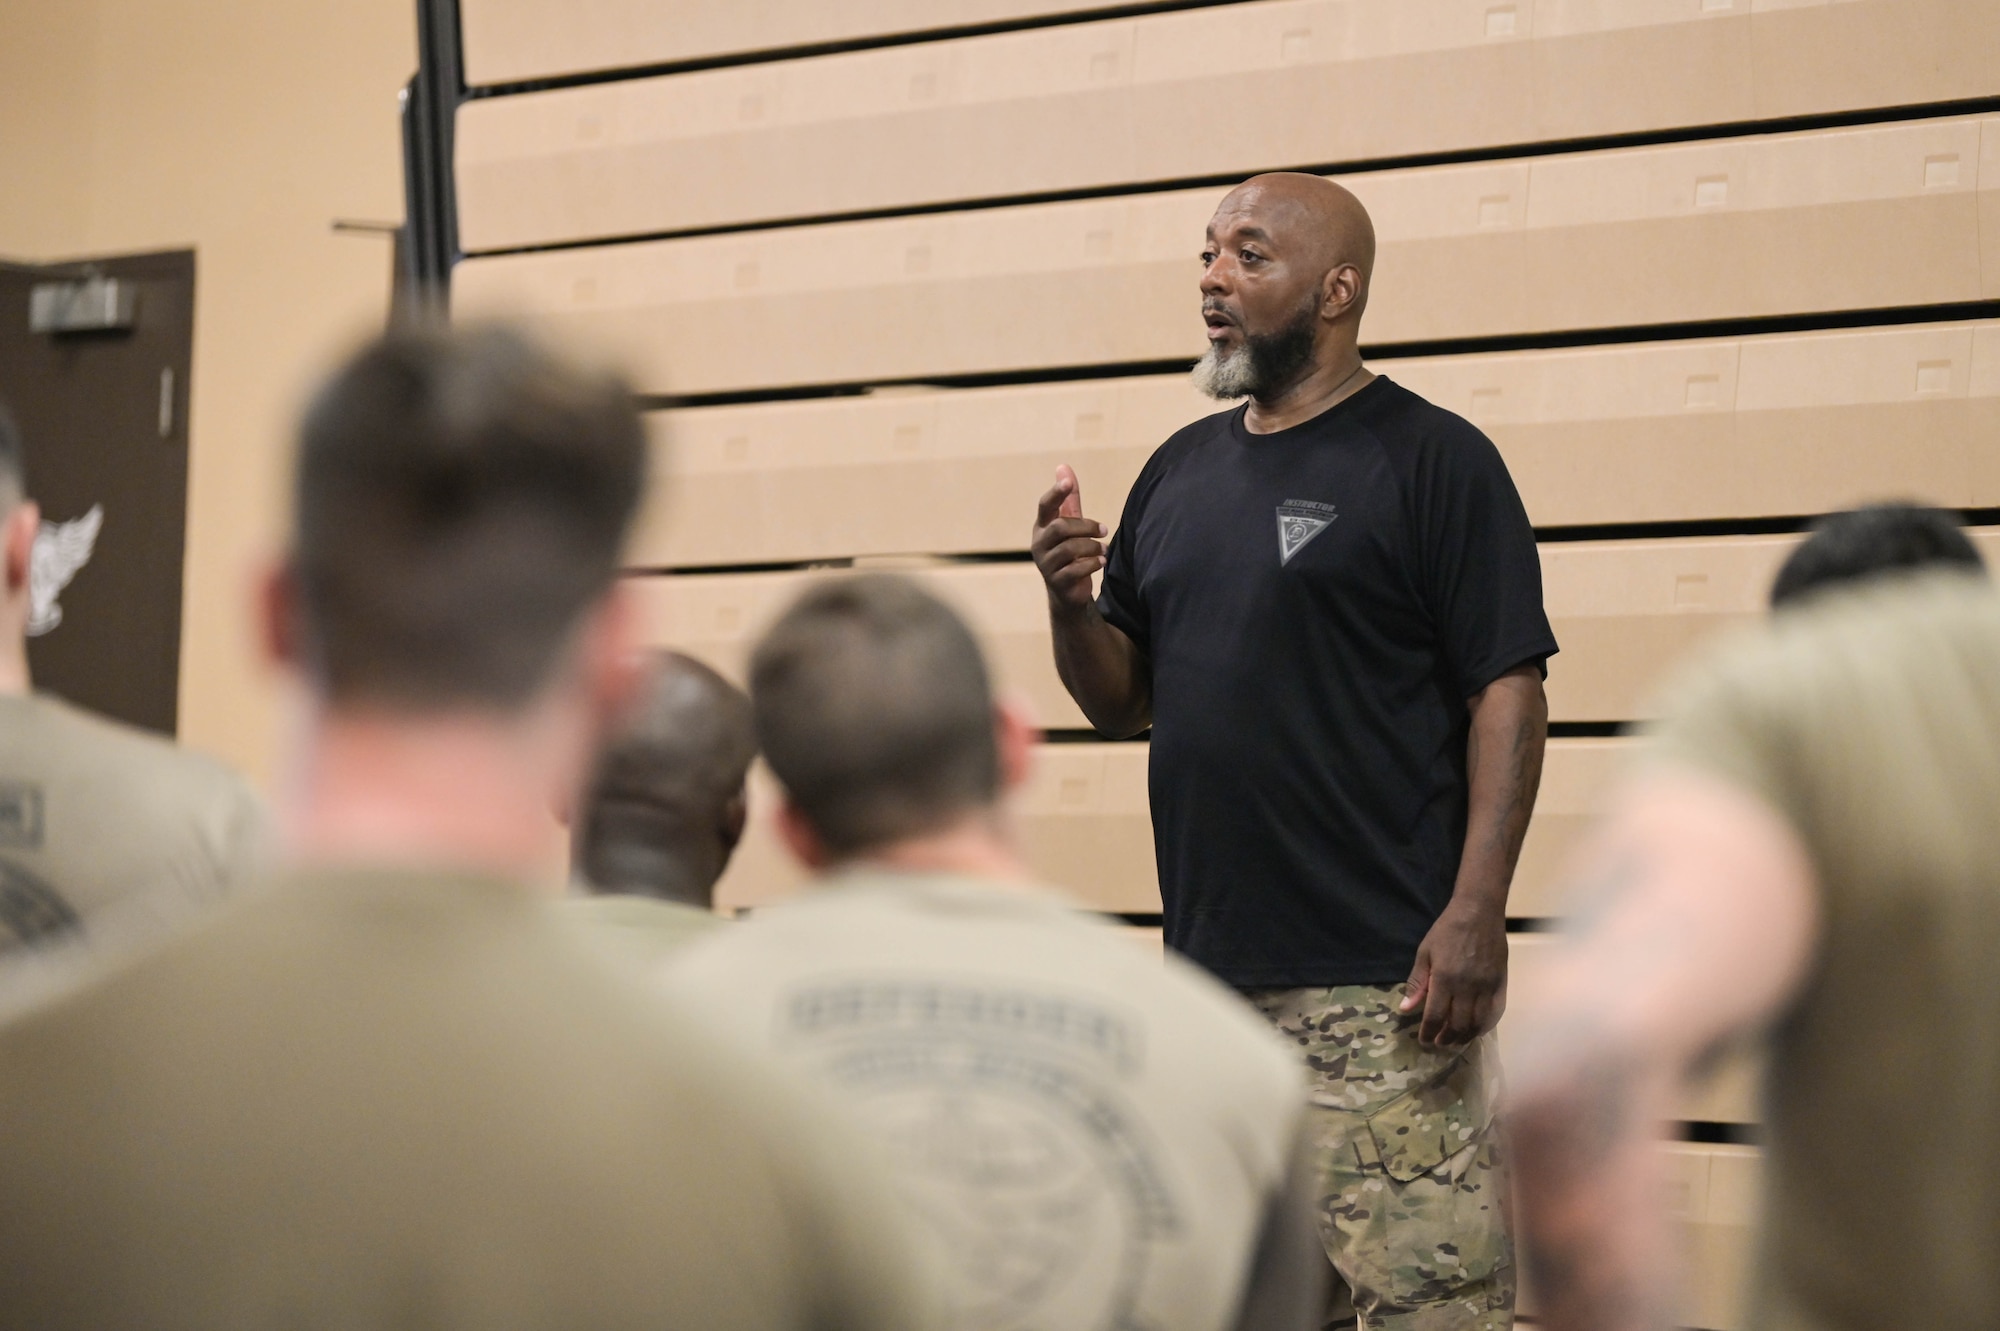 Bobby Cumby, retired security force defender and Office of Special Investigations agent, and Krav Maga instructor, addresses the 23rd Security Forces Squadron S3O-B2 “Thunder Cats” flight during the first iteration of Krav Maga training, April 13, 2022, at Moody Air Force Base, Georgia. Krav Maga is a more specific form of combative training to add to already known self-defense and weapons retention skills. (U.S. Air Force photo by Senior Airman Rebeckah Medeiros)